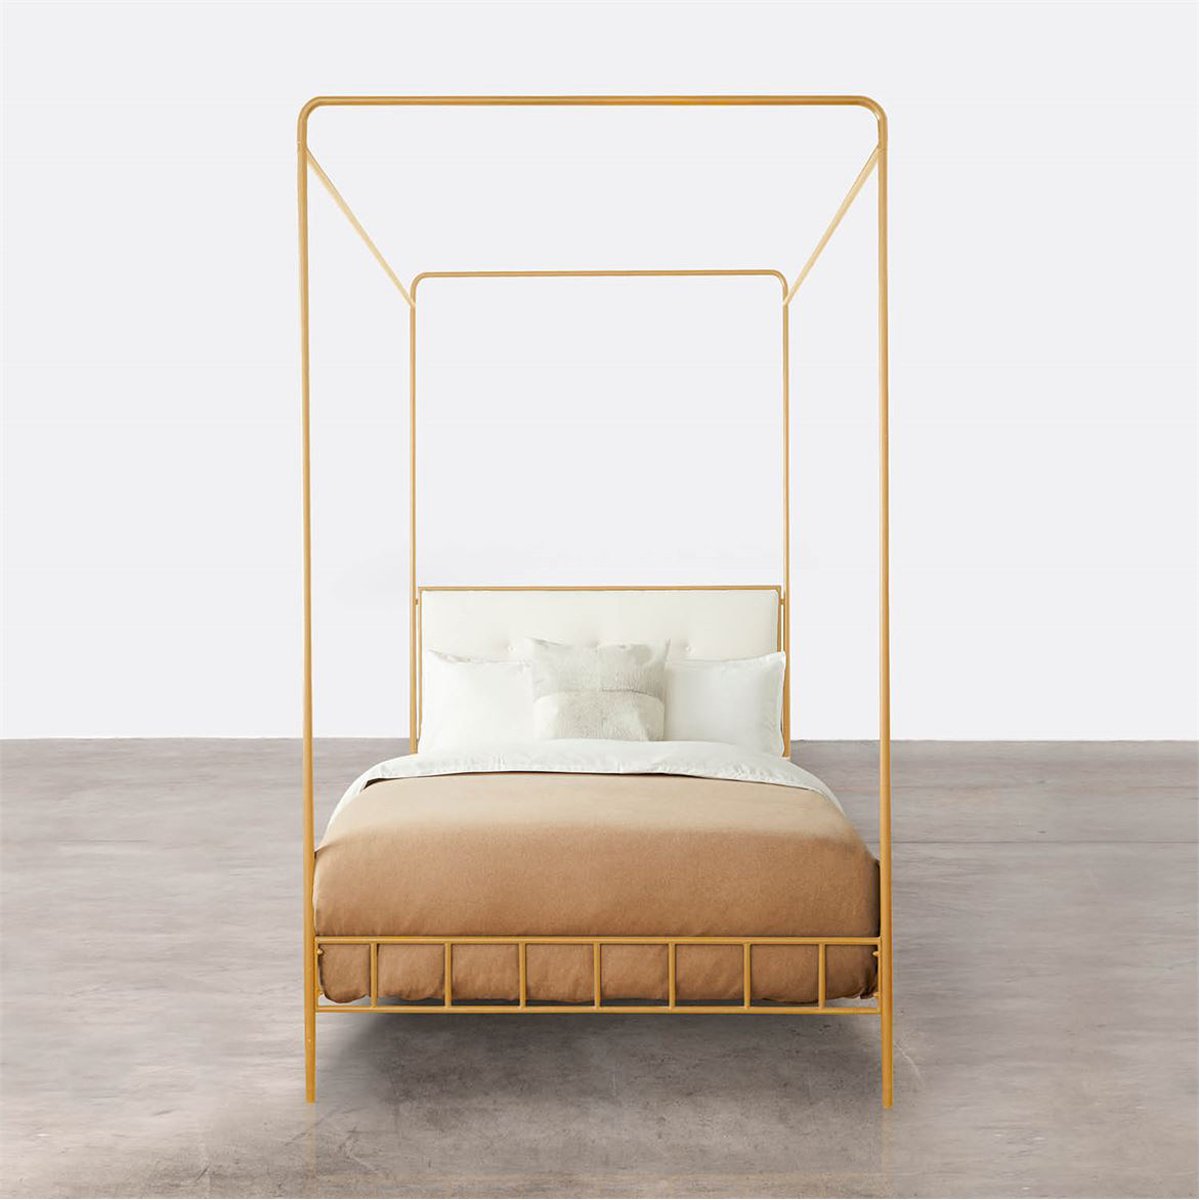 Made Goods Laken Iron Canopy Bed in Brenta Cotton/Jute